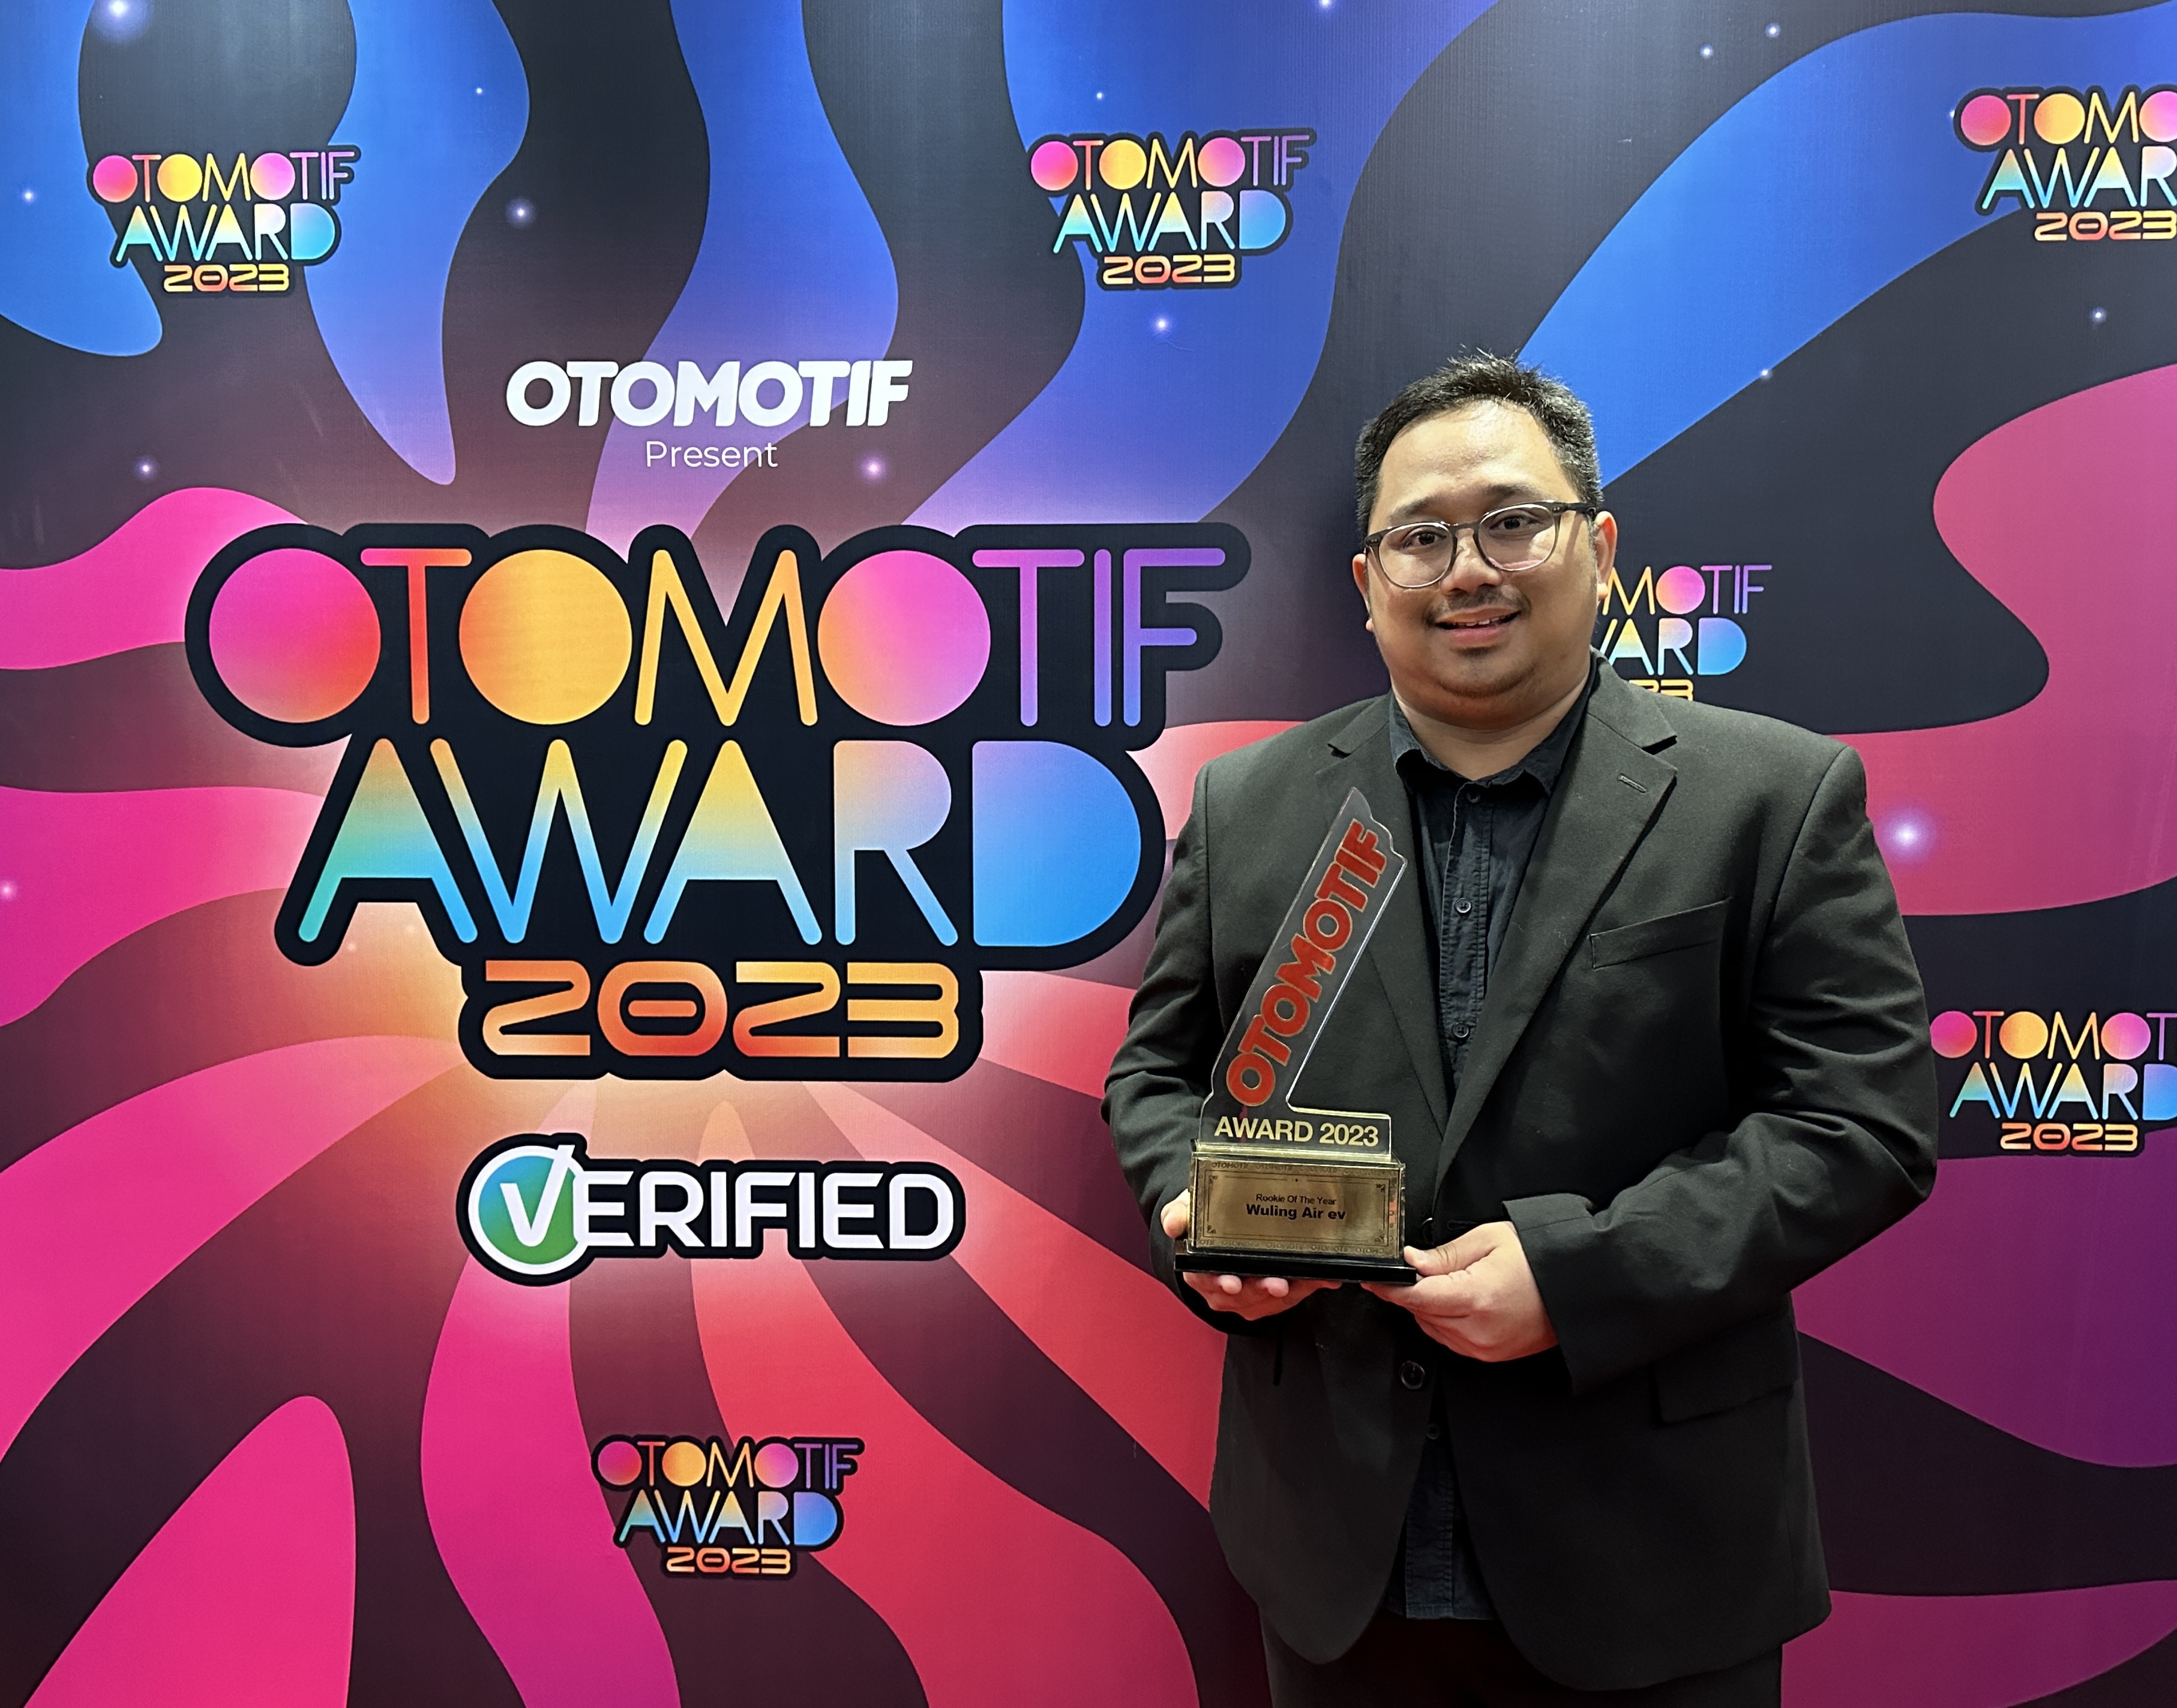 Image Wuling Air ev Wins the Rookie of the Year Award at the Otomotif Award 2023